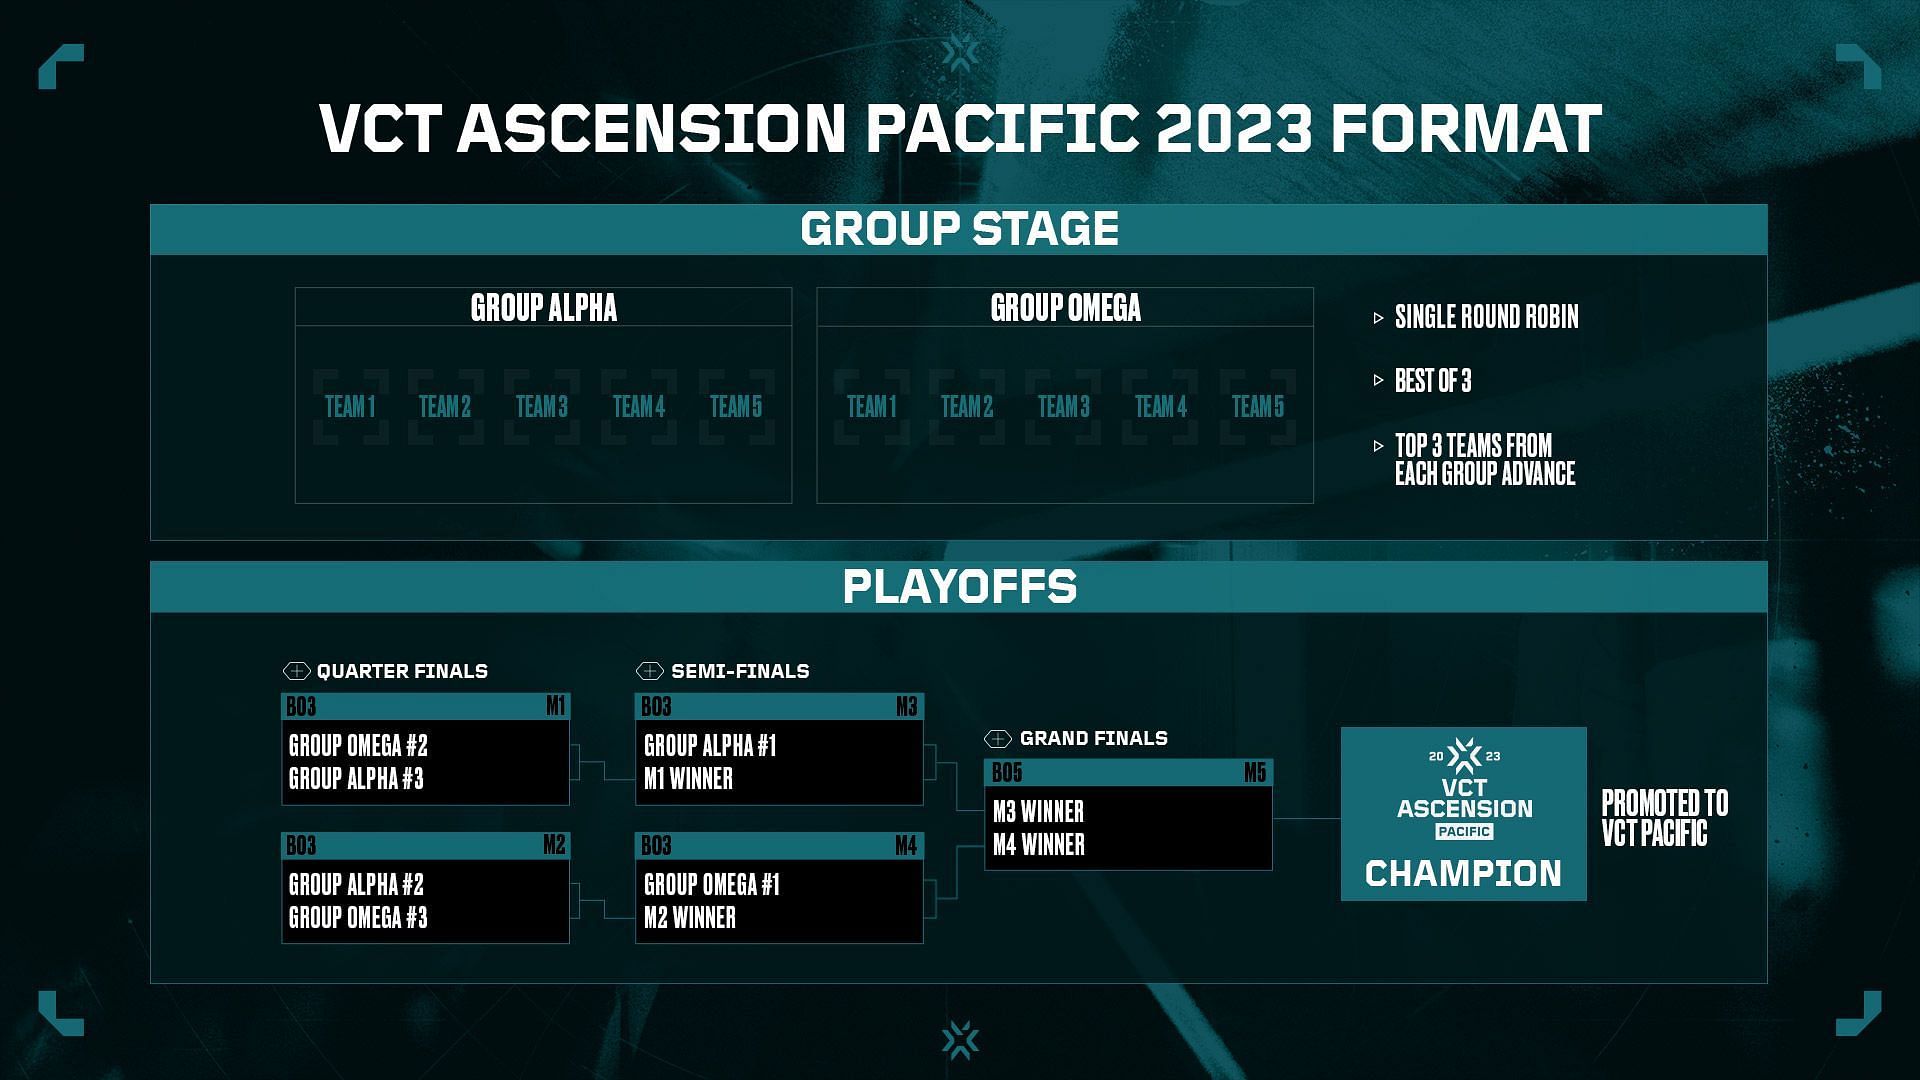 VCT Ascension Pacific 2023 Teams, schedule, where to watch, and more